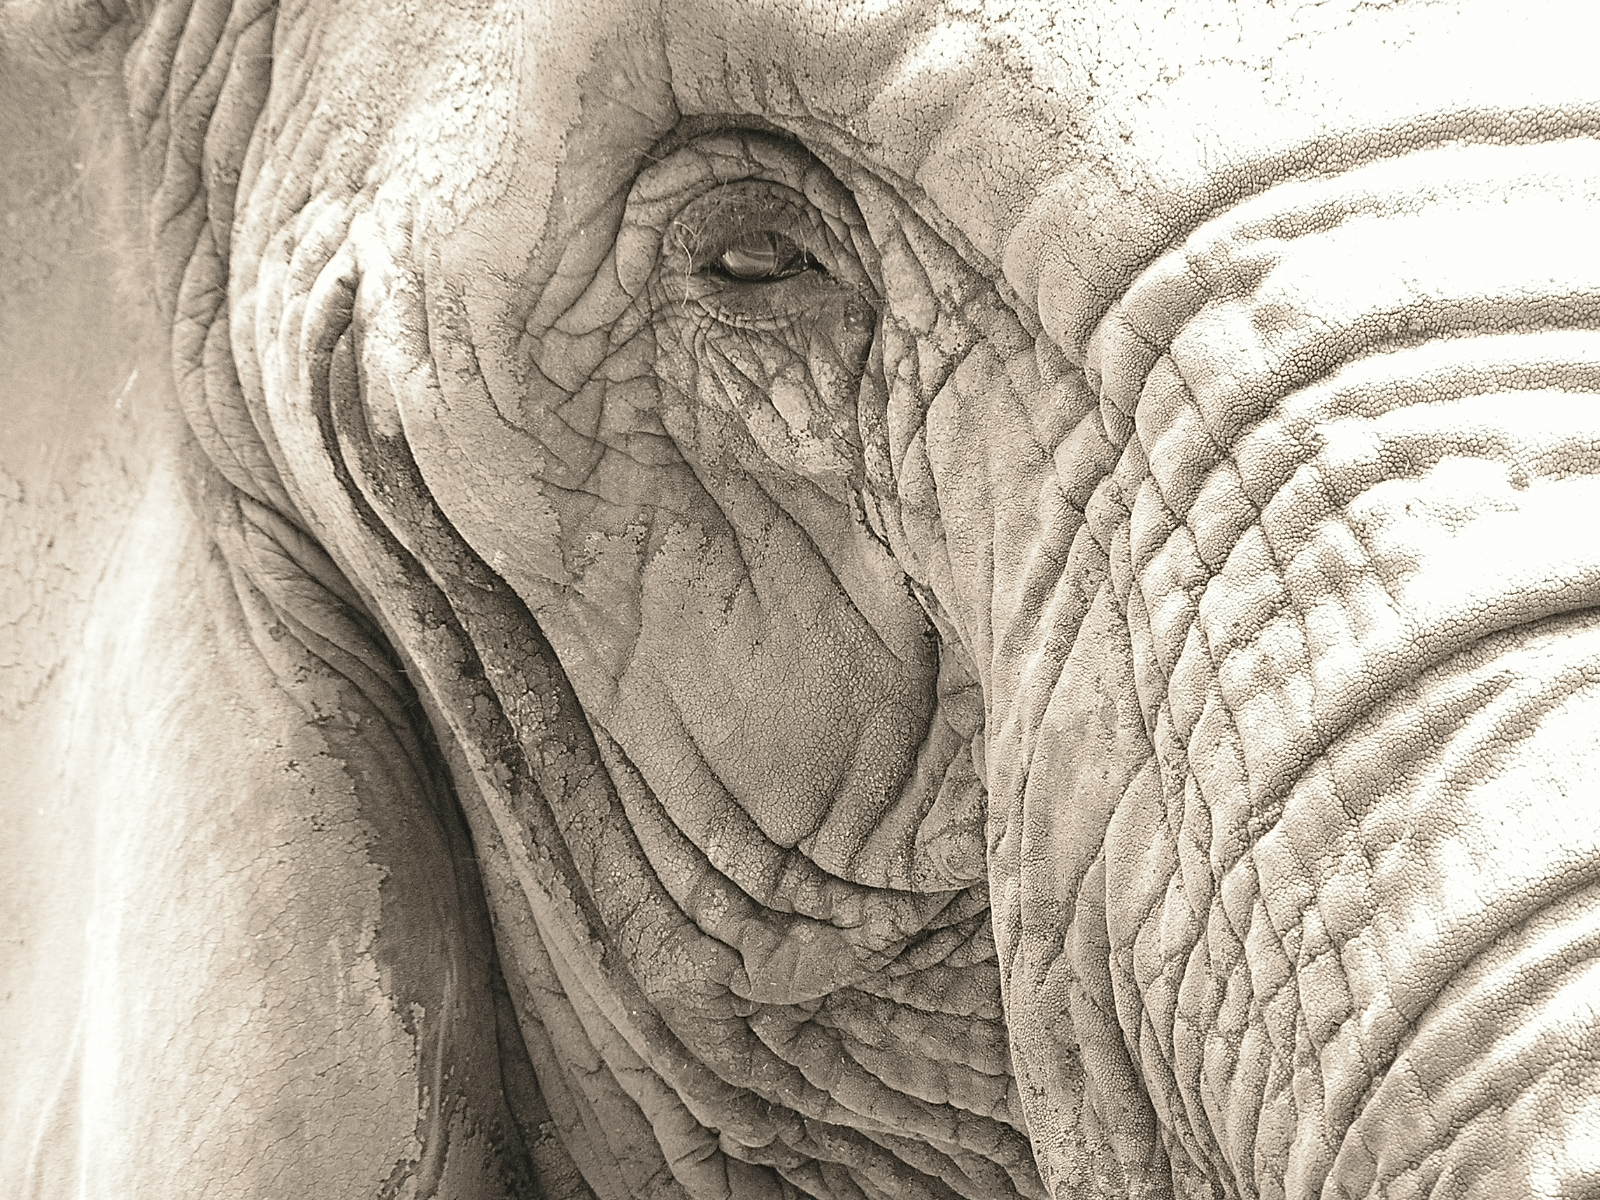 the back end of an elephant trunk